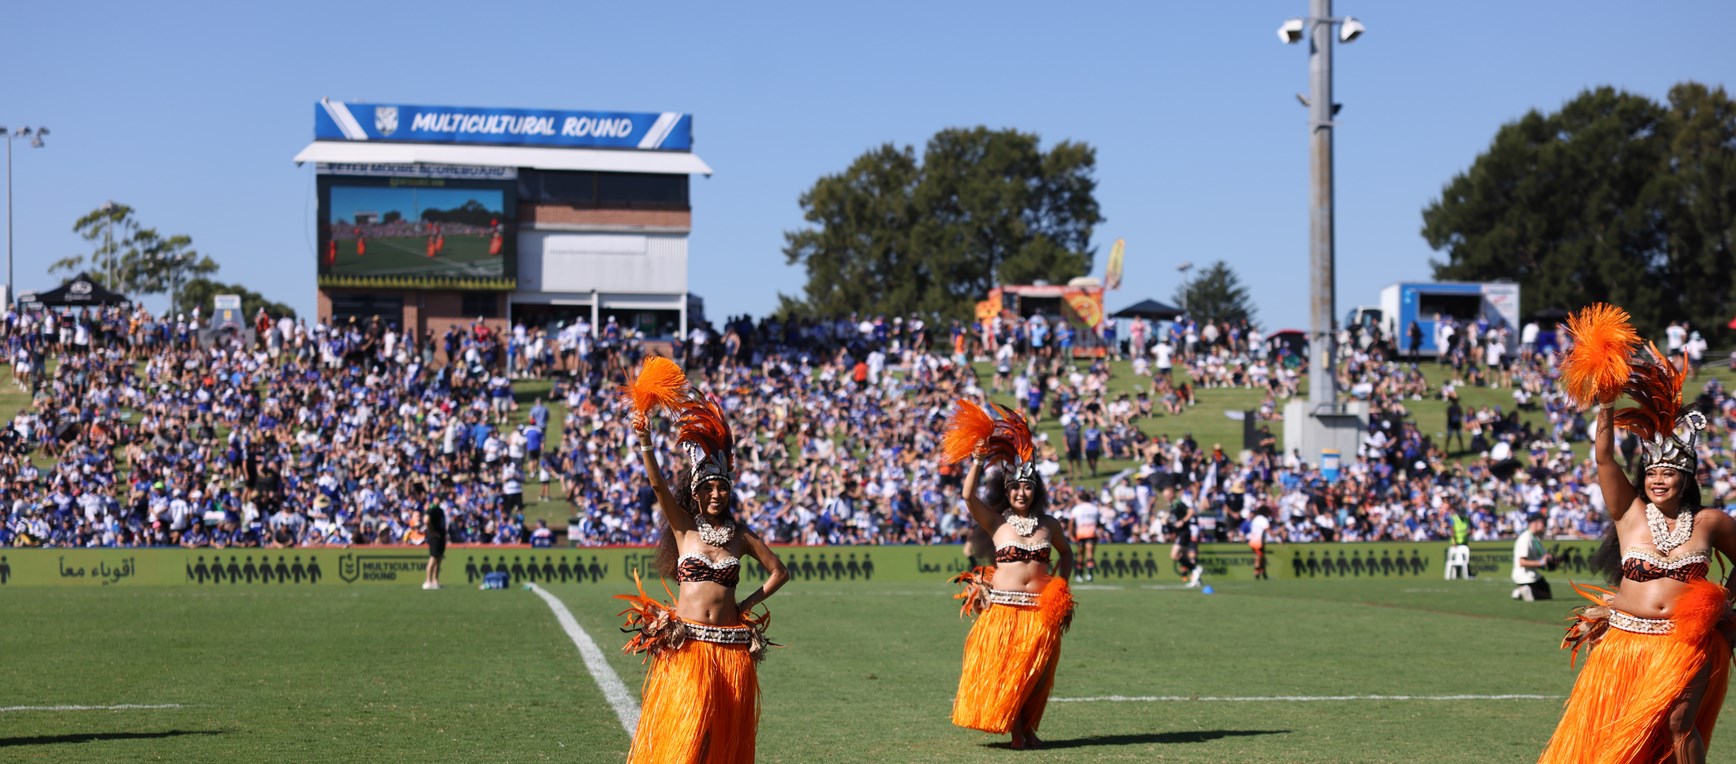 A Multicultural Extravaganza: Round 3 at Belmore